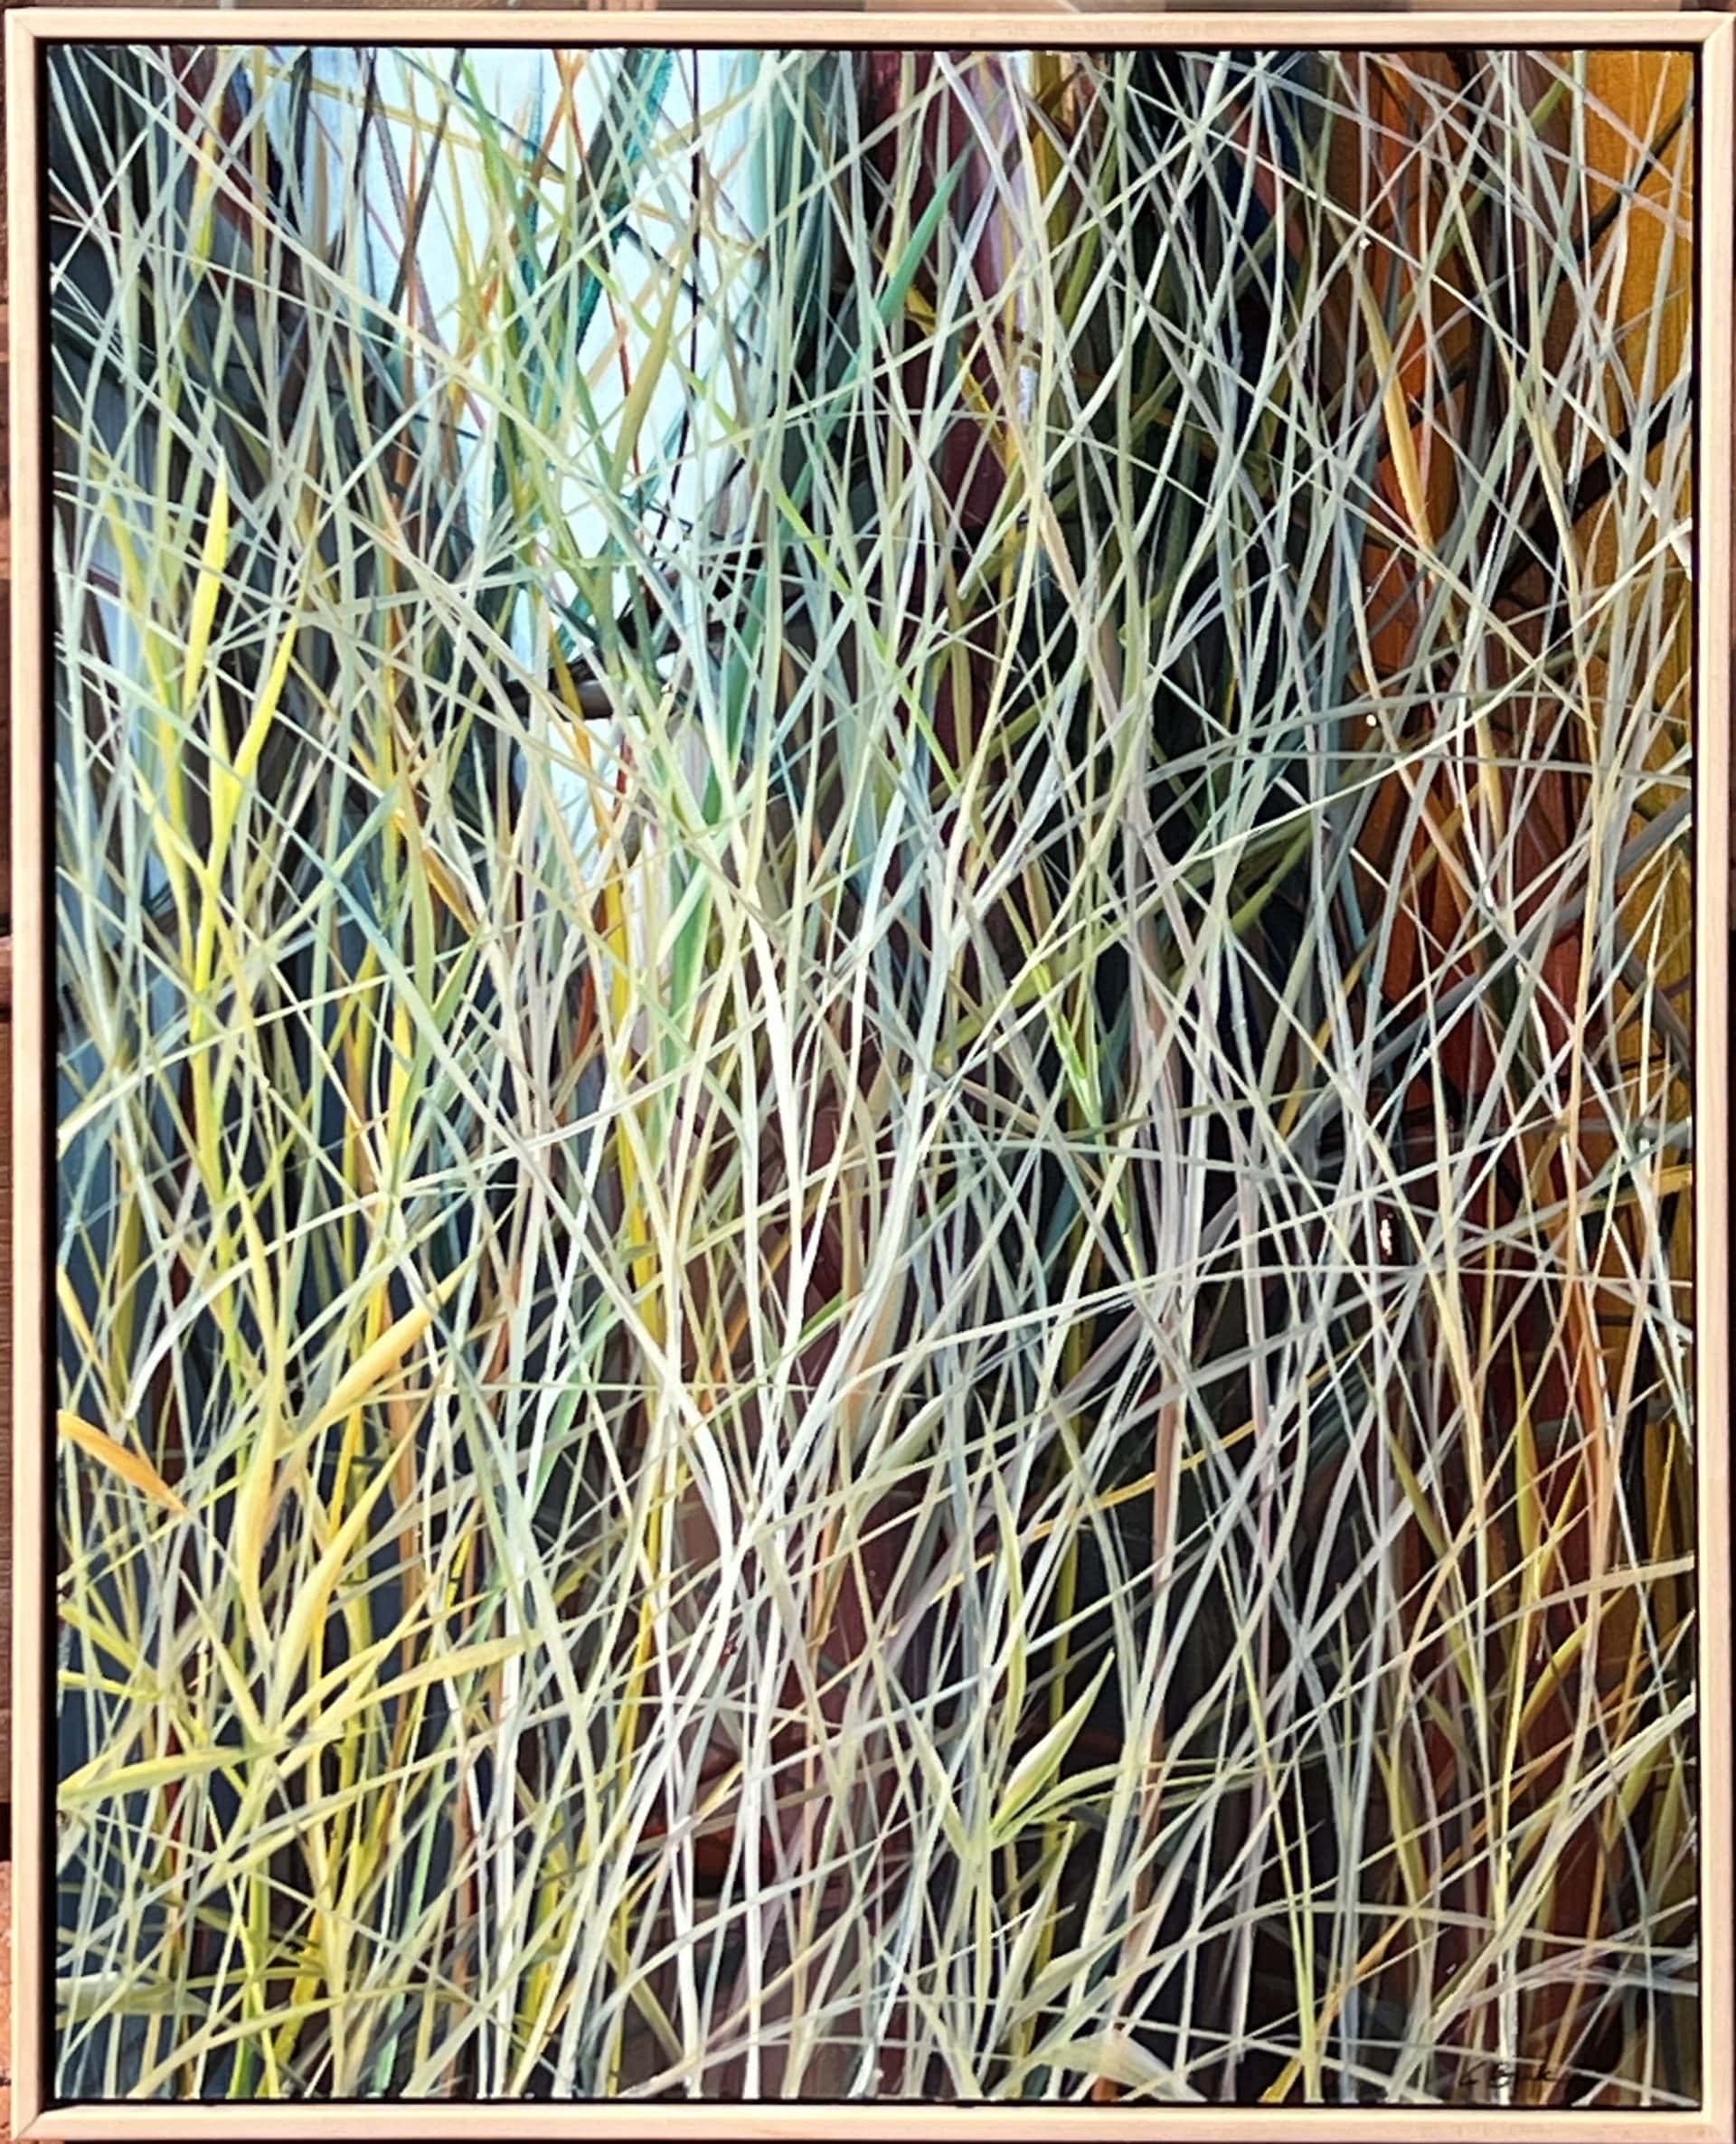 detail of reed grasses